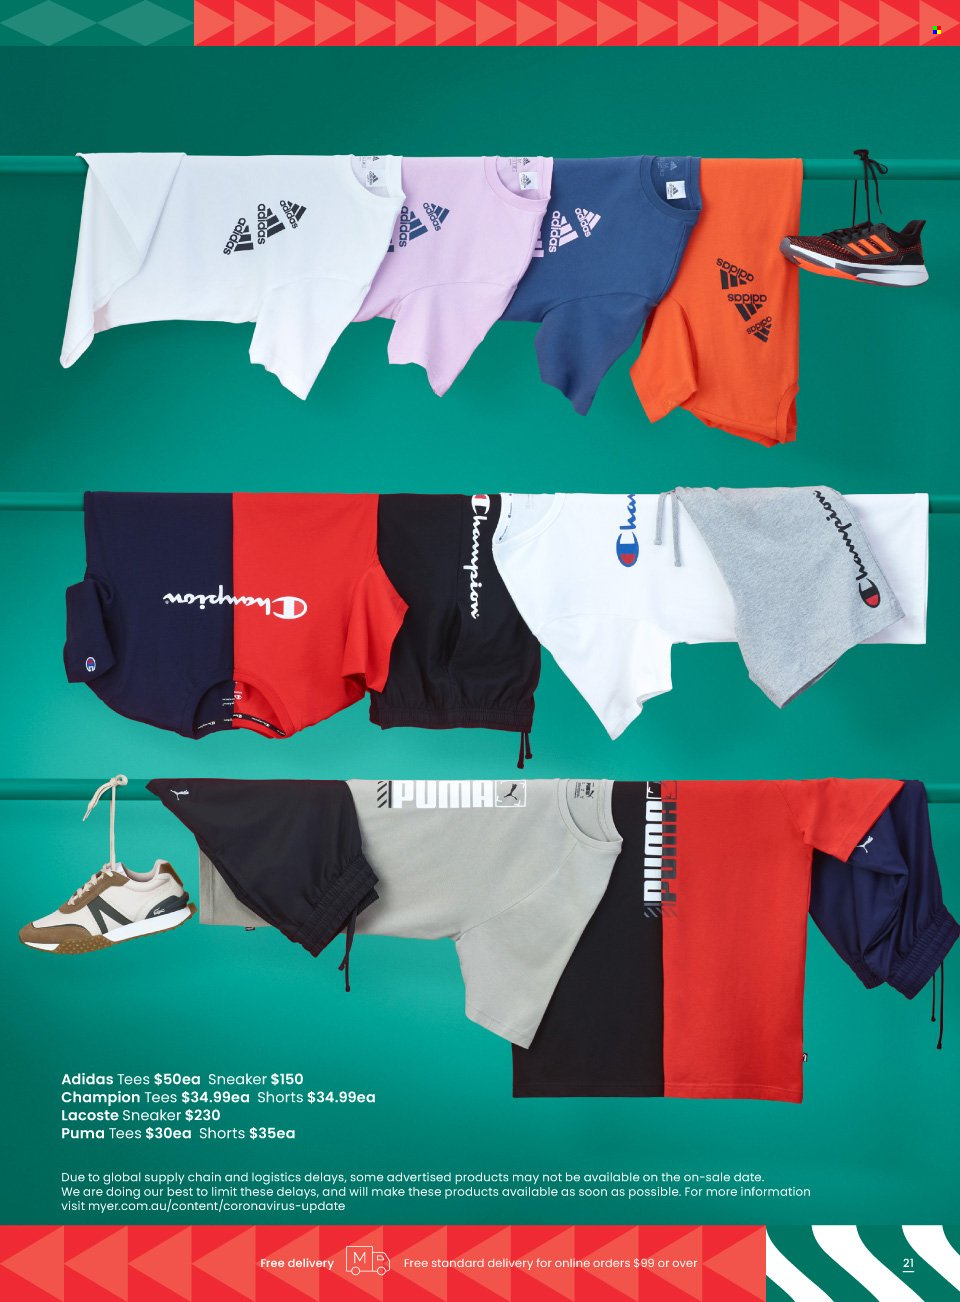 thumbnail - Myer Catalogue - Sales products - Adidas, sneakers, Puma, Lacoste, shorts, t-shirt. Page 21.